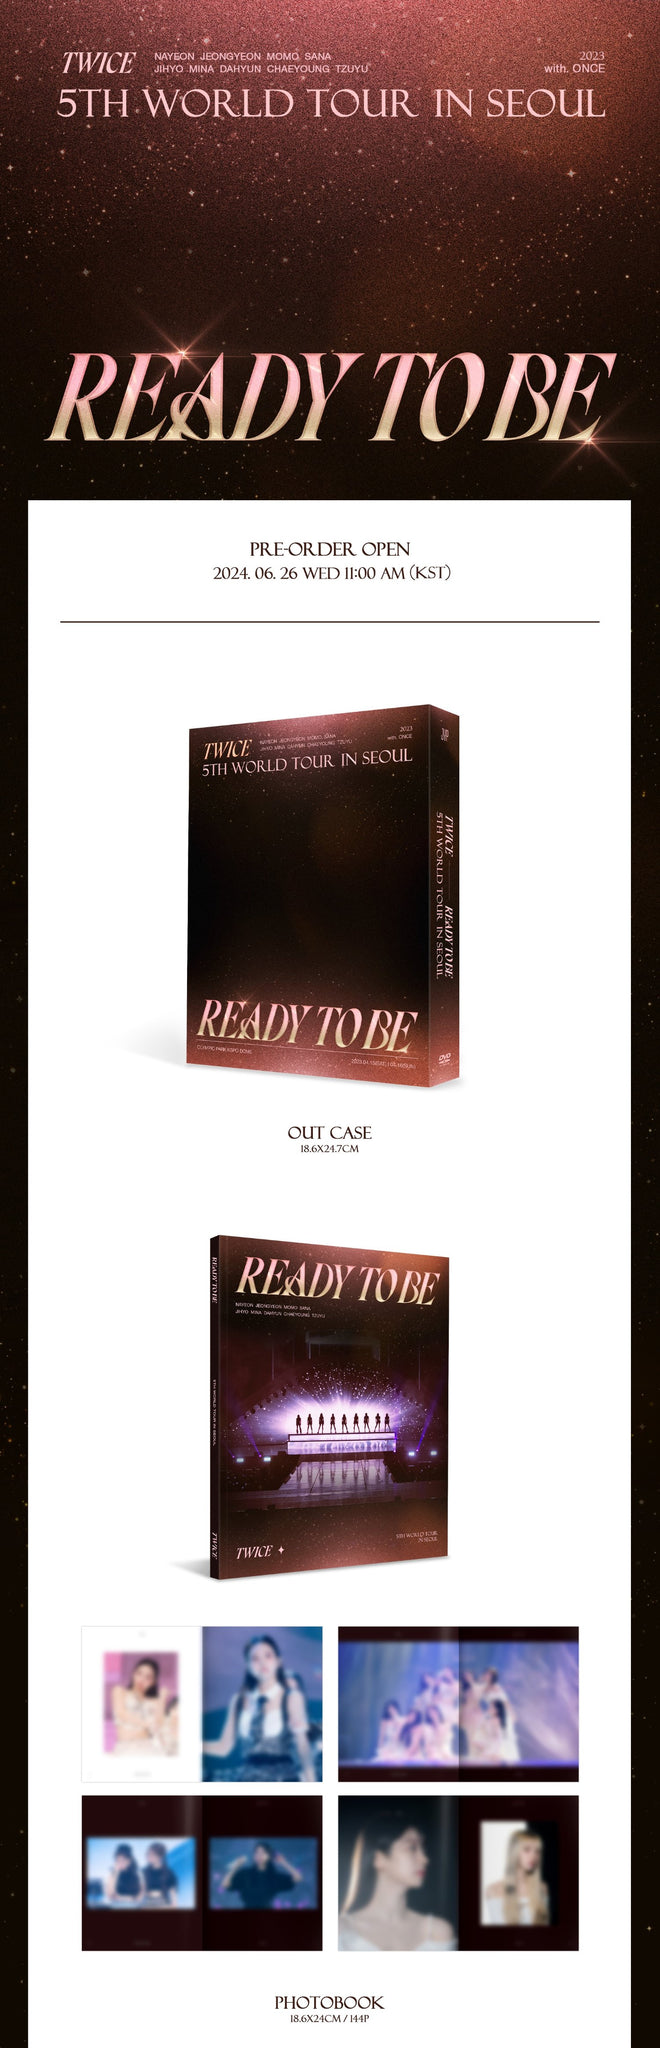 TWICE 5TH WORLD TOUR 'READY TO BE' IN SEOUL DVD Inclusions: Out Case, Photobook